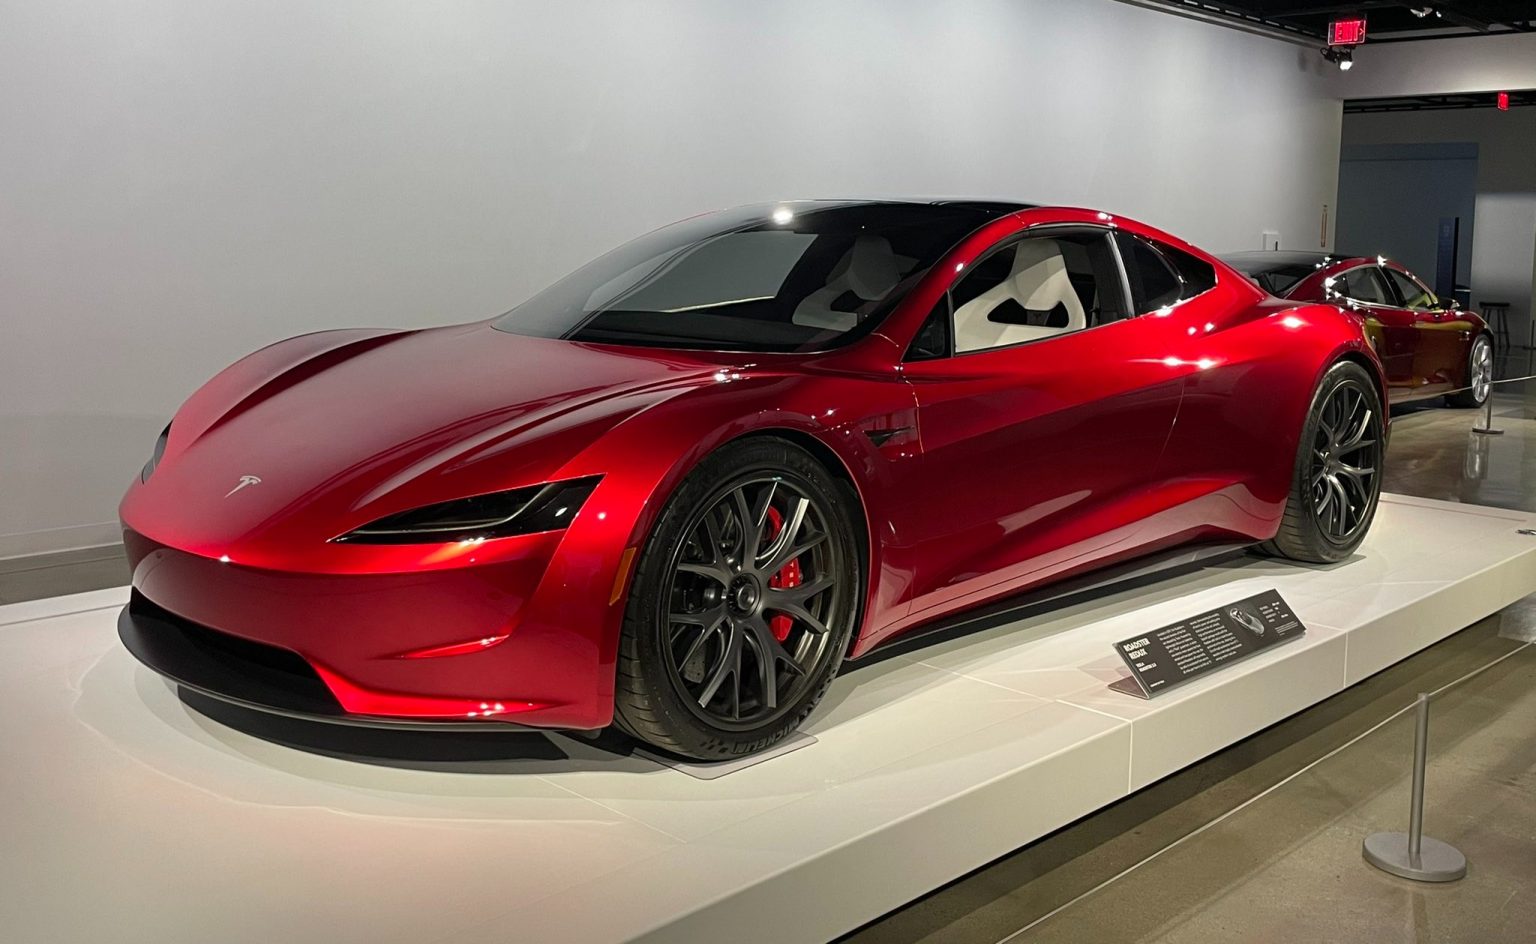 Tesla Roadster SpaceX Package's shocking 0-60 mph time teased in museum